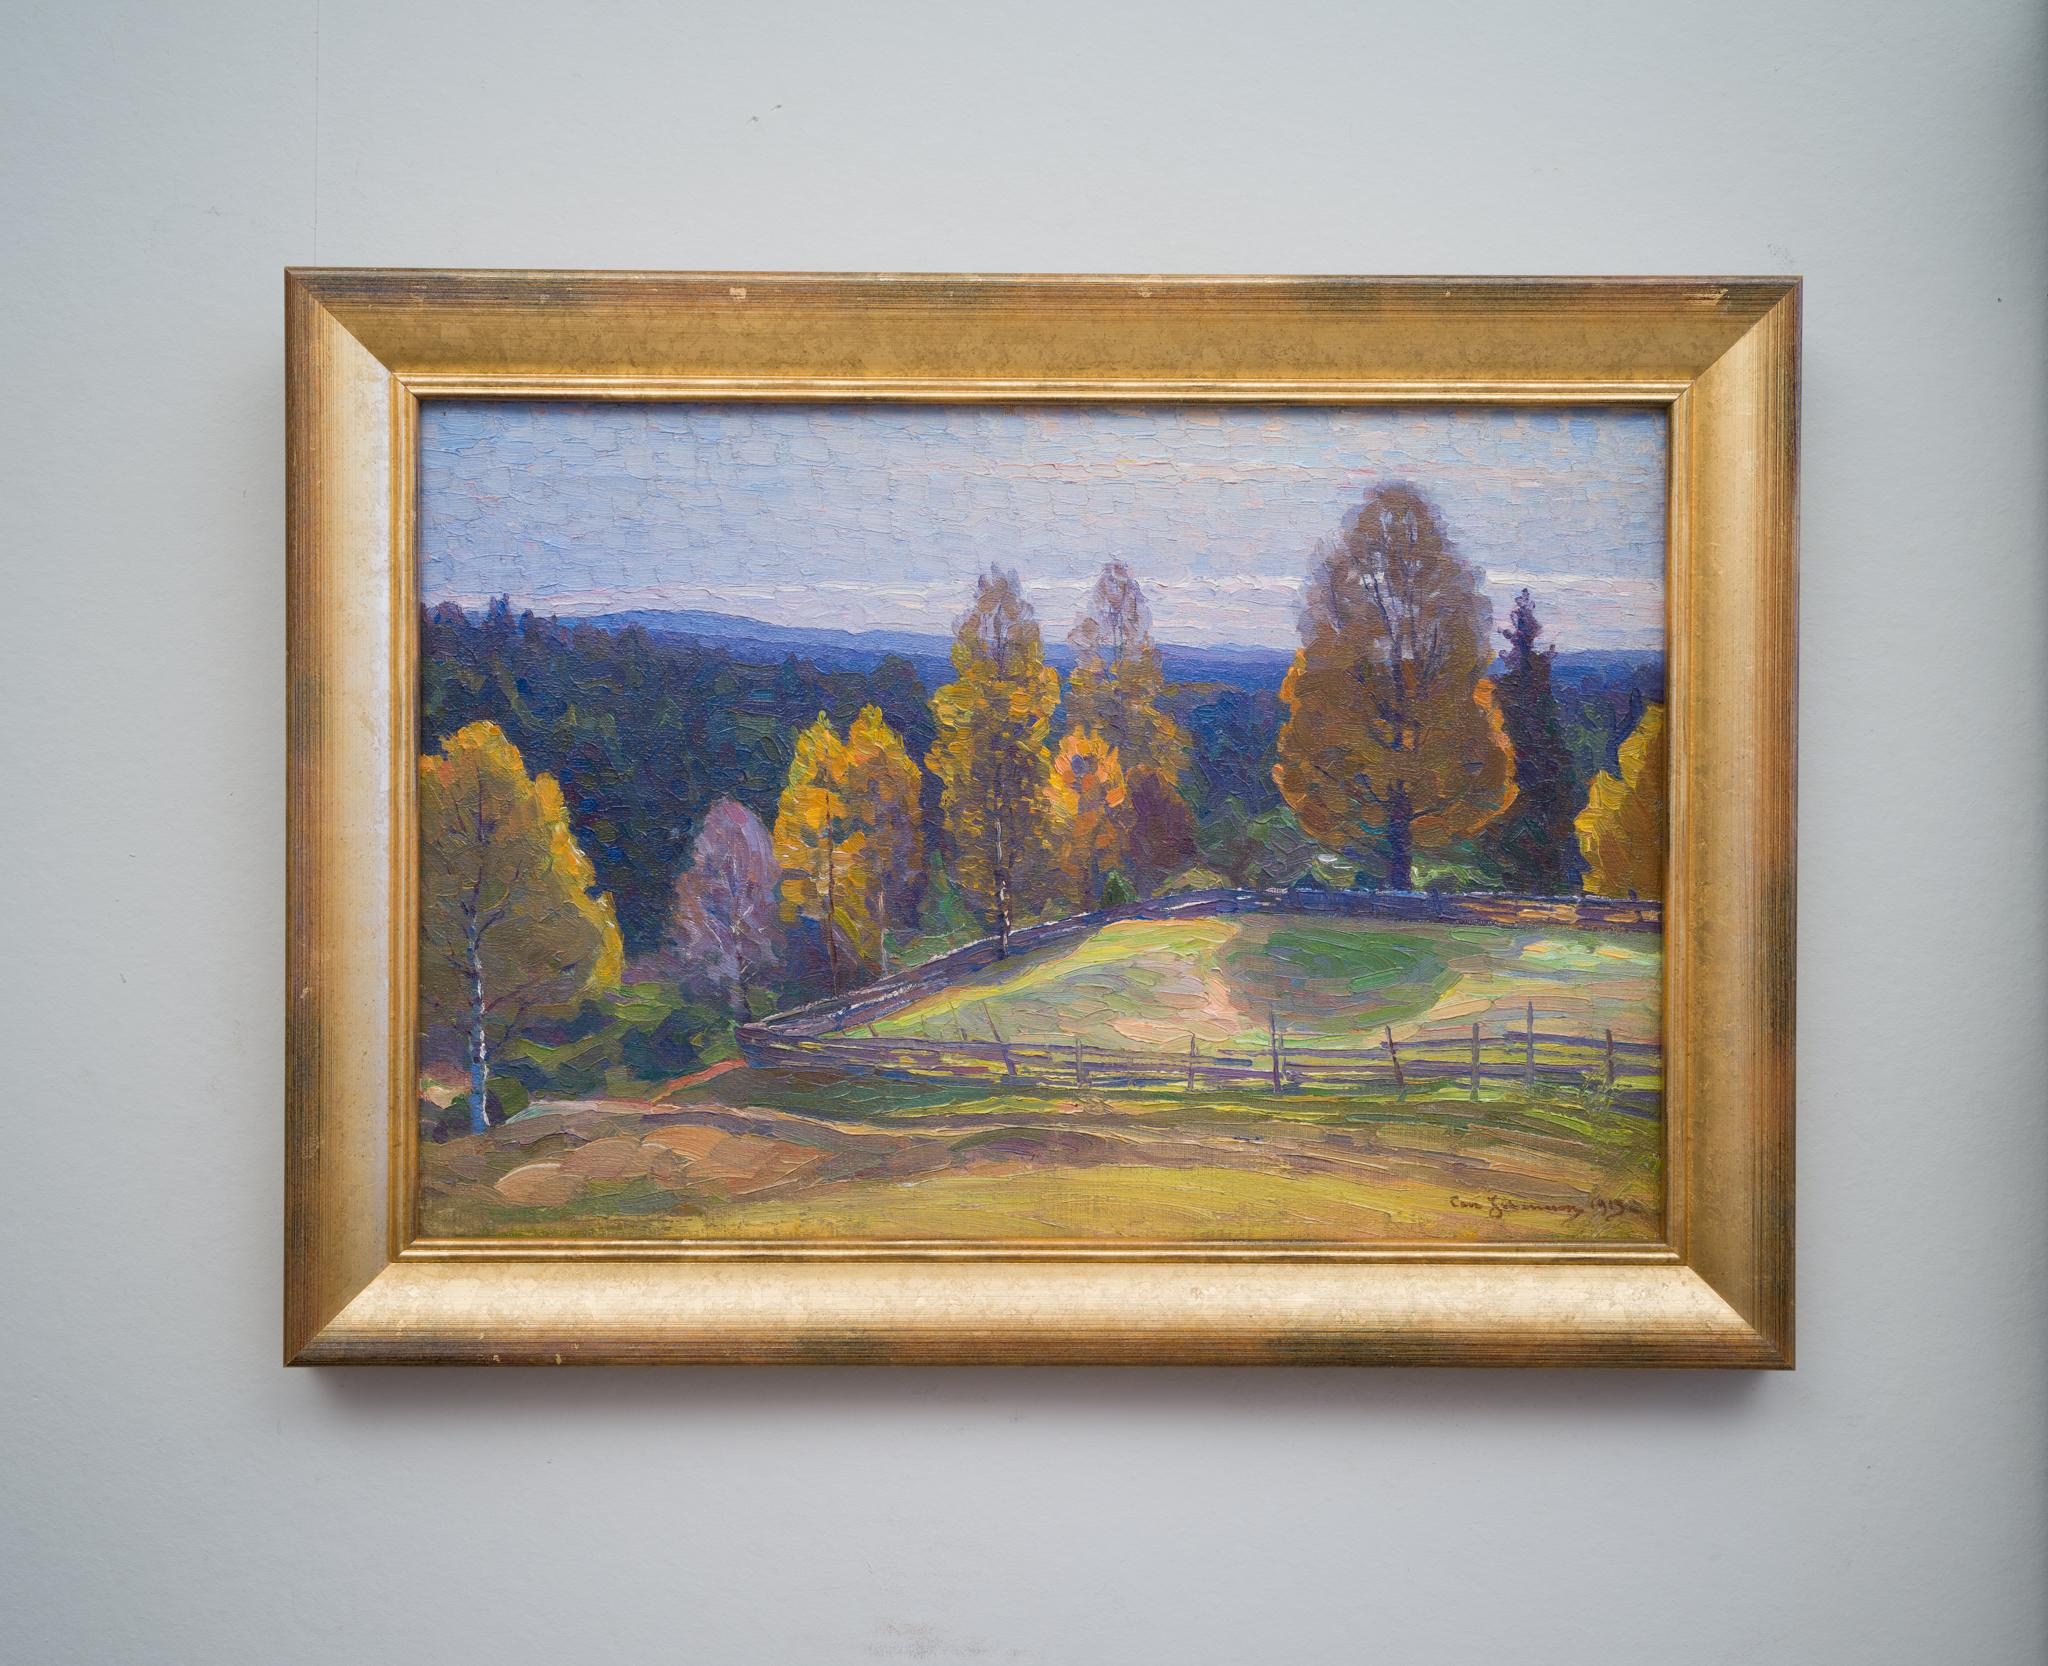 Vast Autumn Landscape With Blue Mountains by Swedish Artist Carl Johansson, 1913 - Post-Impressionist Painting by Carl Johansson 